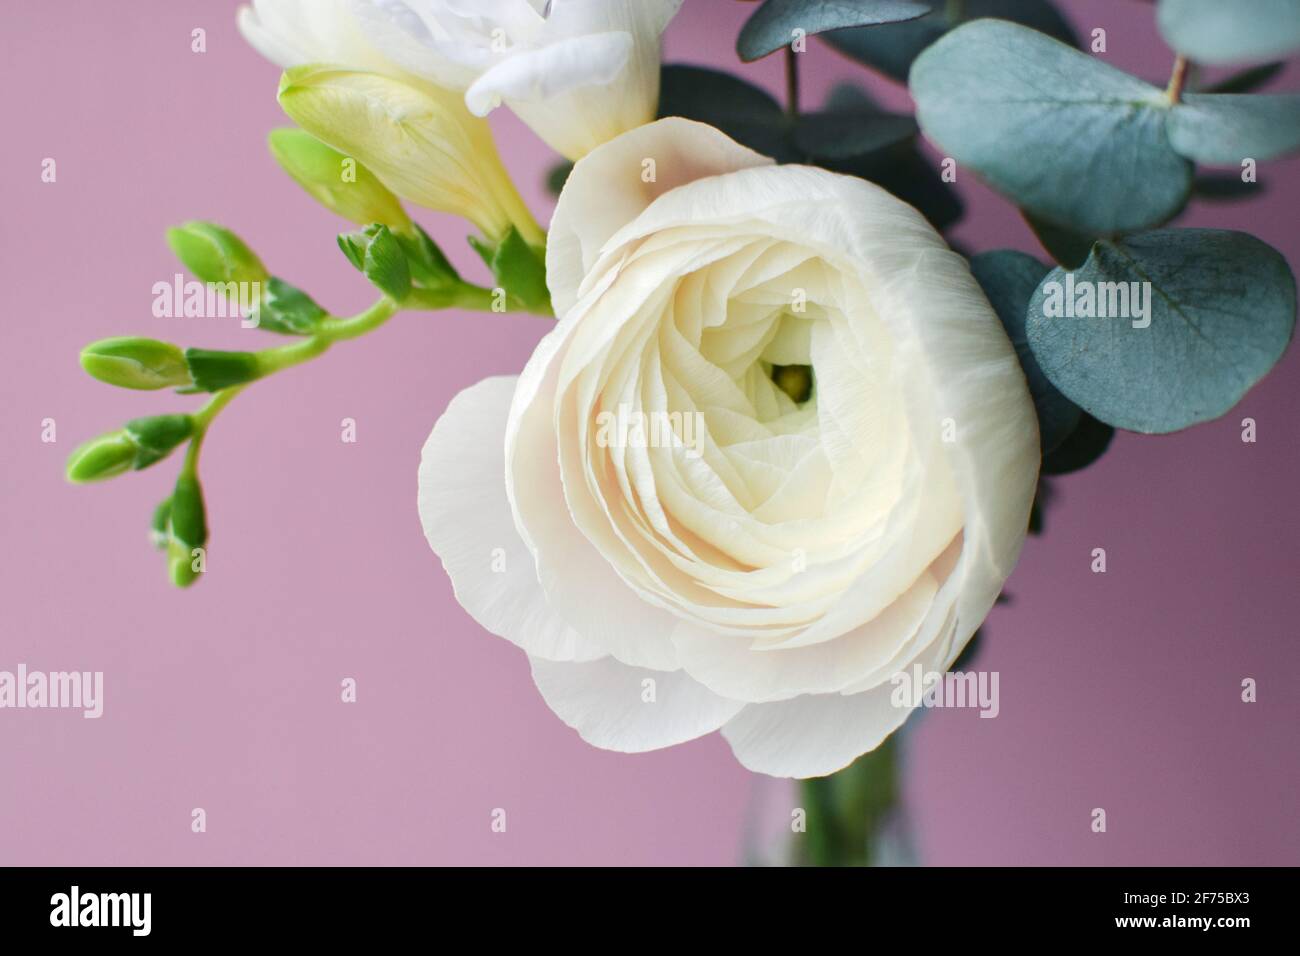 Delicate bouquet of delicate pink ranunculus flower and white freesia with eucalyptus sprigs on a pink background Stock Photo